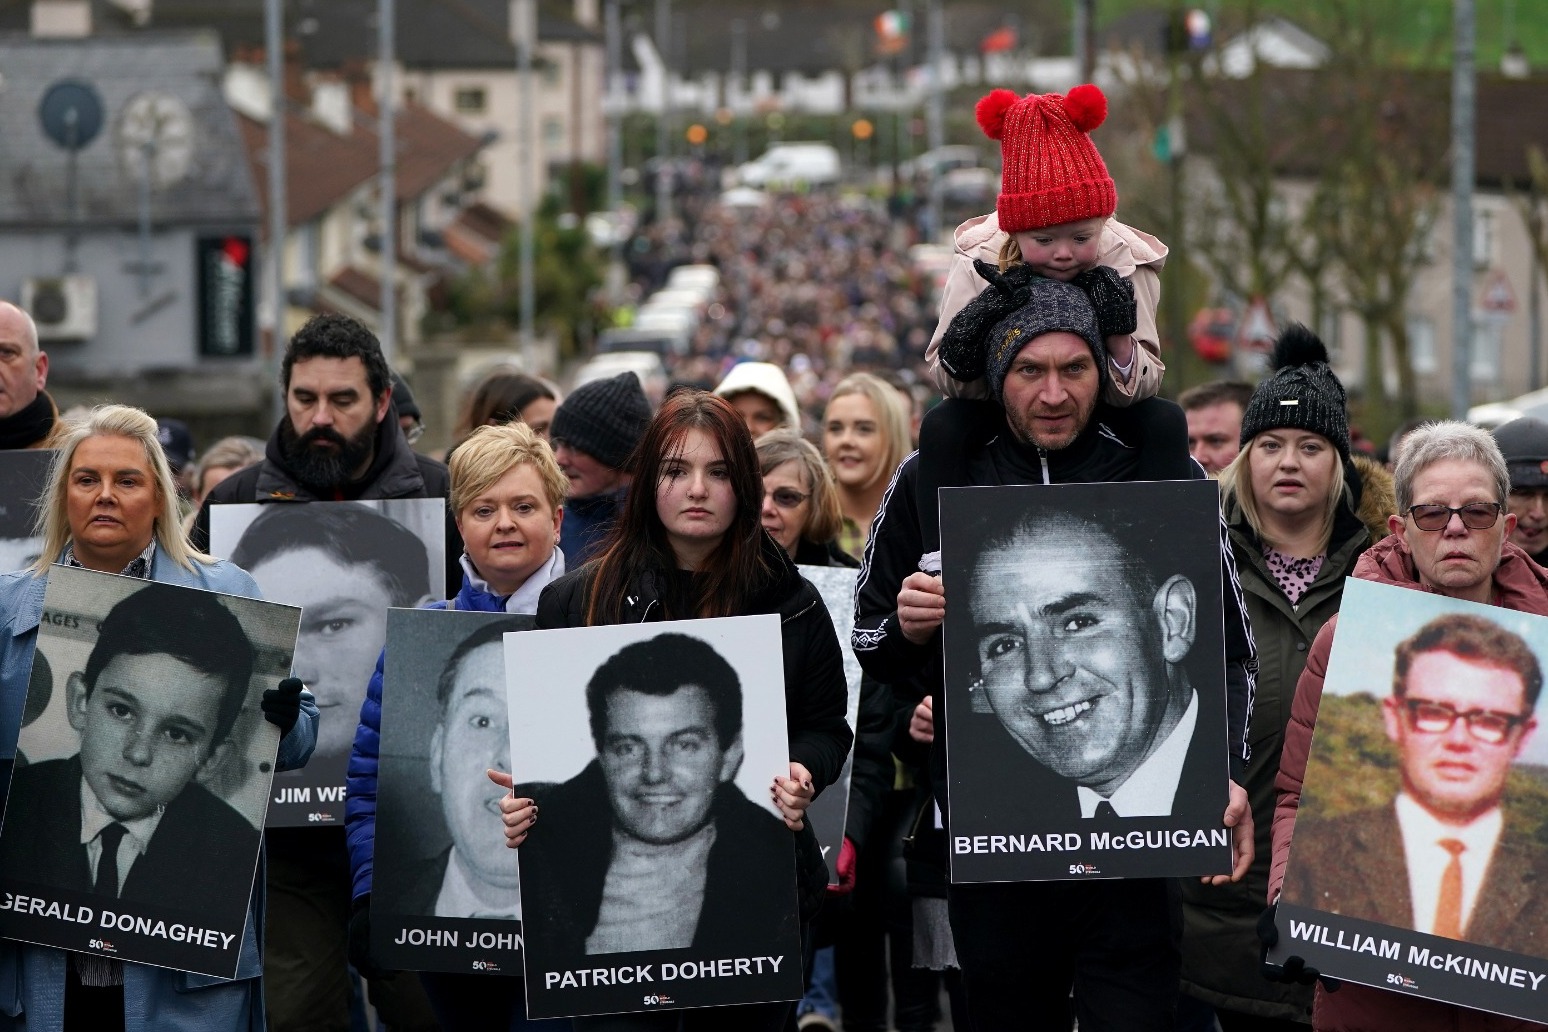 Hundreds attend commemoration event to mark 50th anniversary of Bloody Sunday 